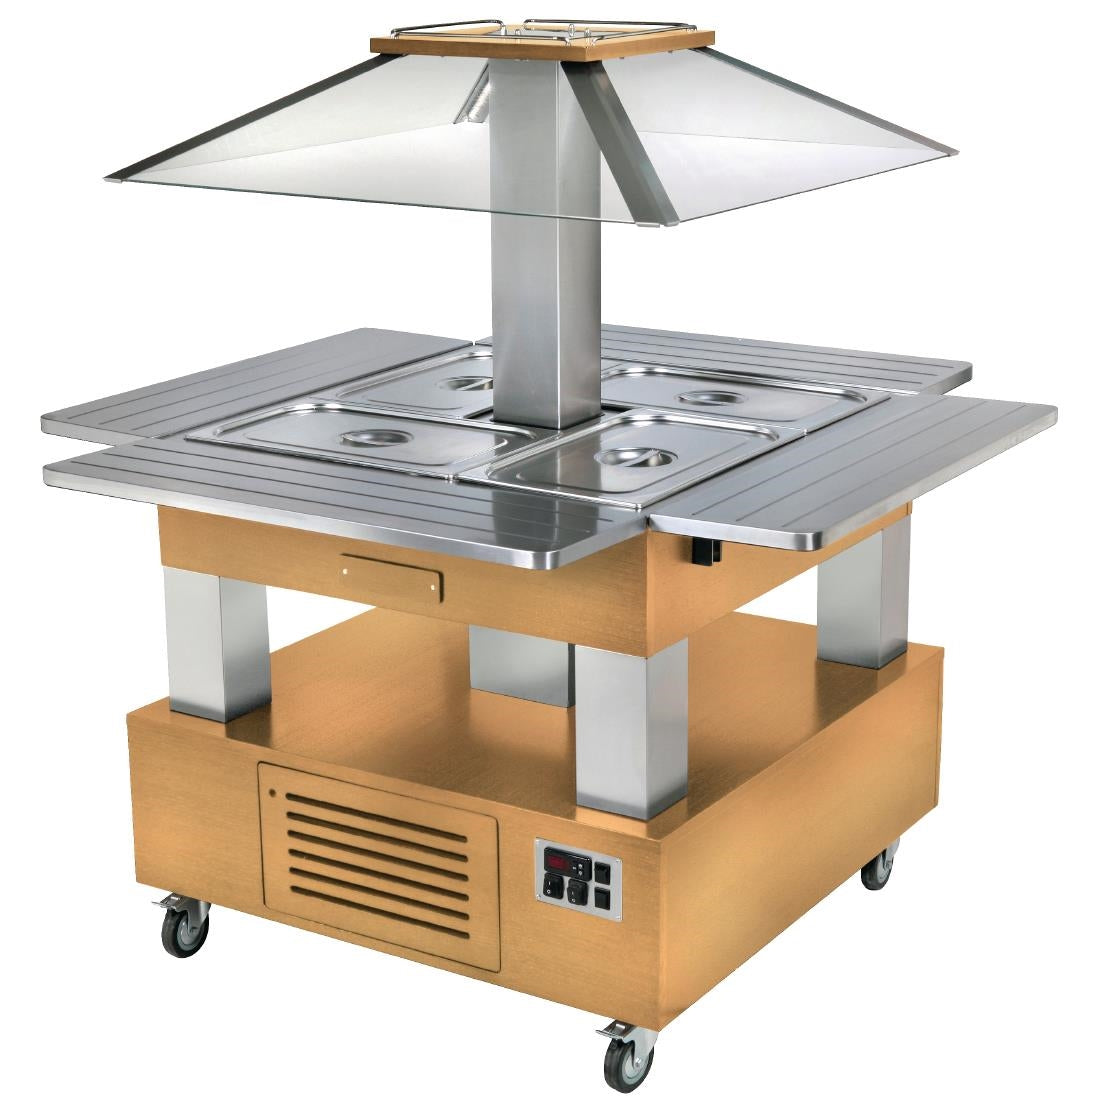 Roller Grill Chilled Salad Bar Square Light Wood